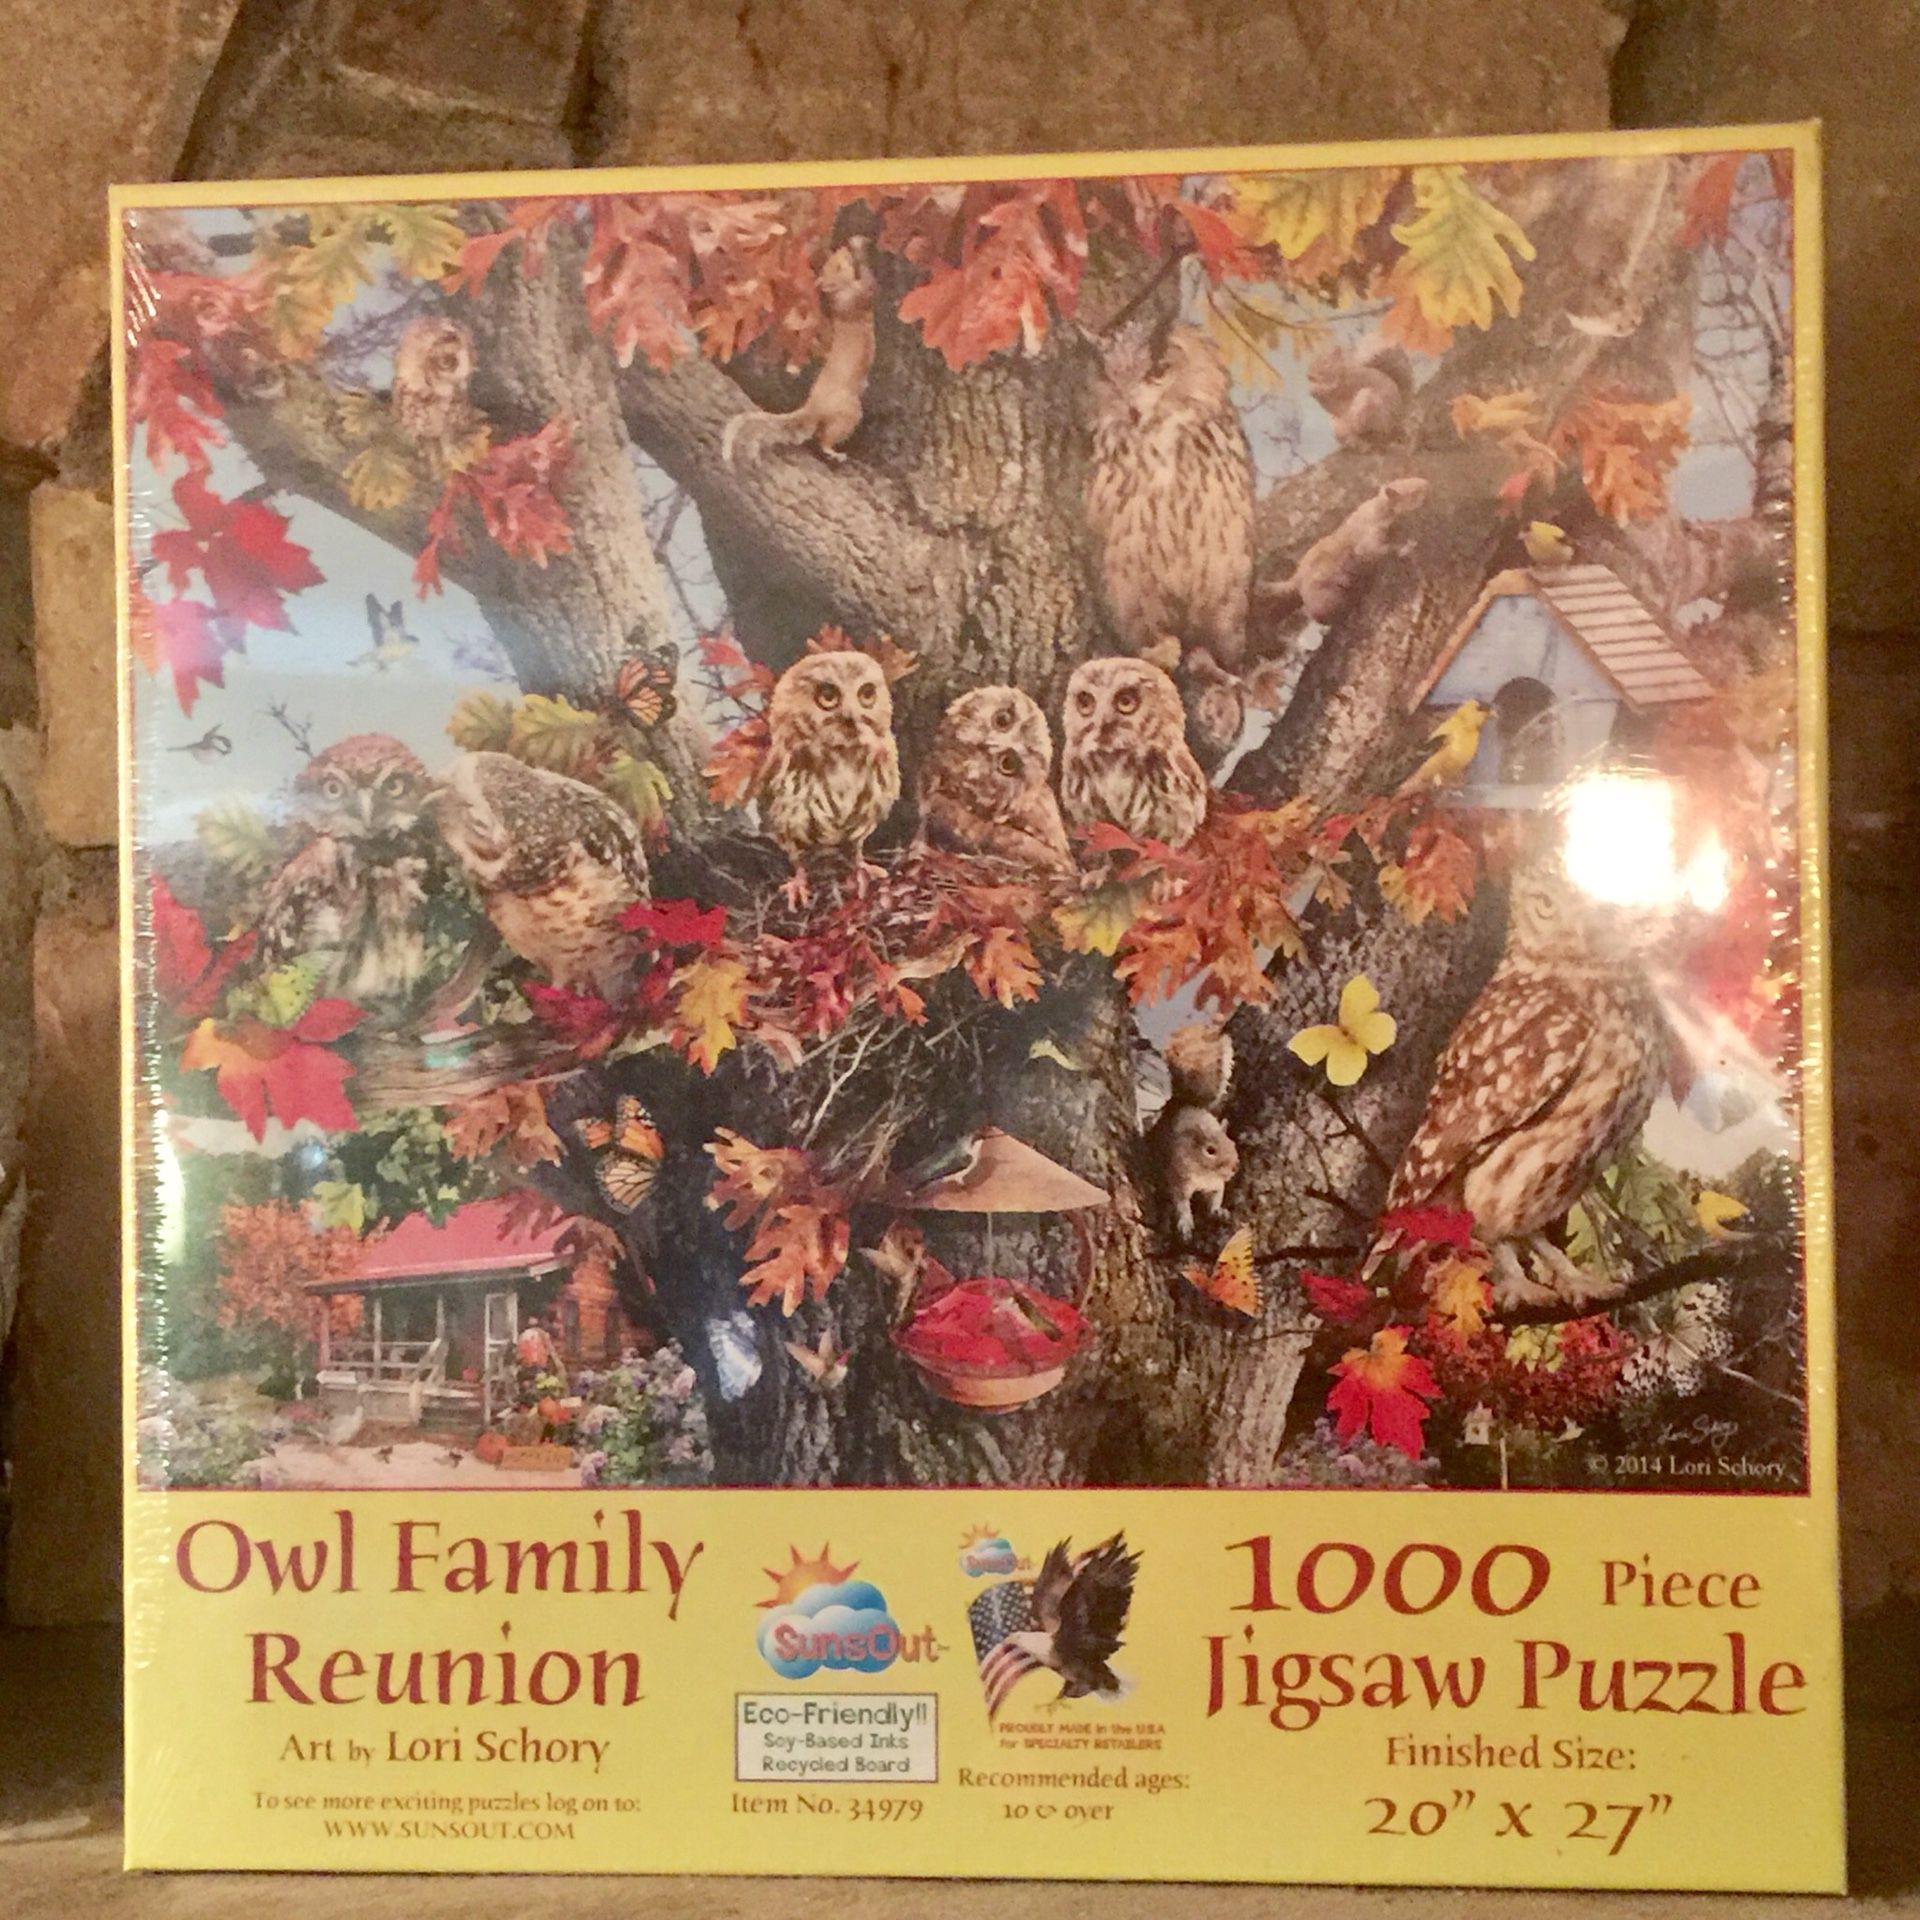 Owl Family Reunion Jigsaw Puzzle - 1000 Pieces - New